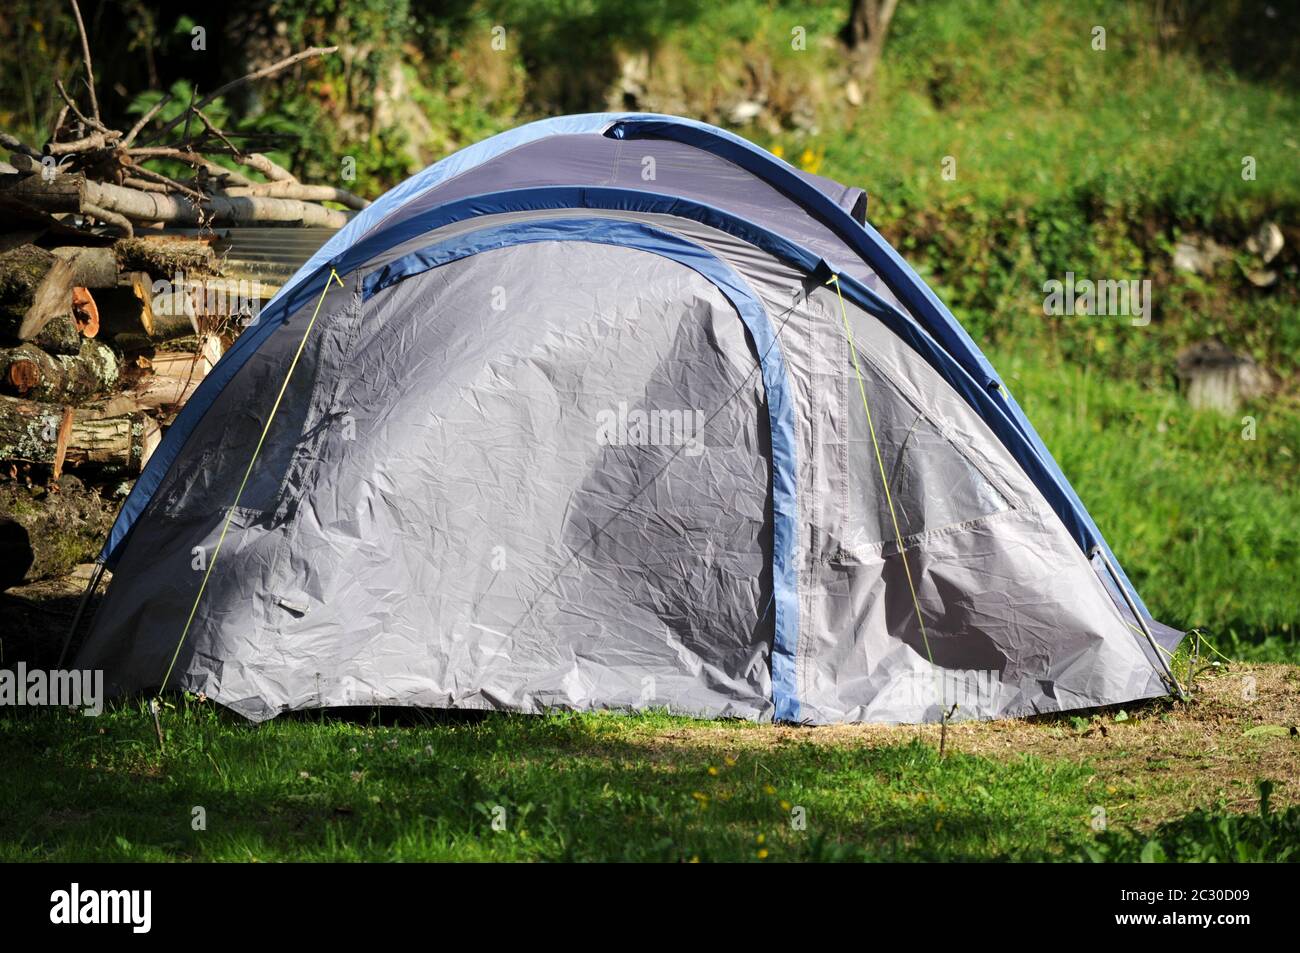 Summer camping holidays in a tent Stock Photo